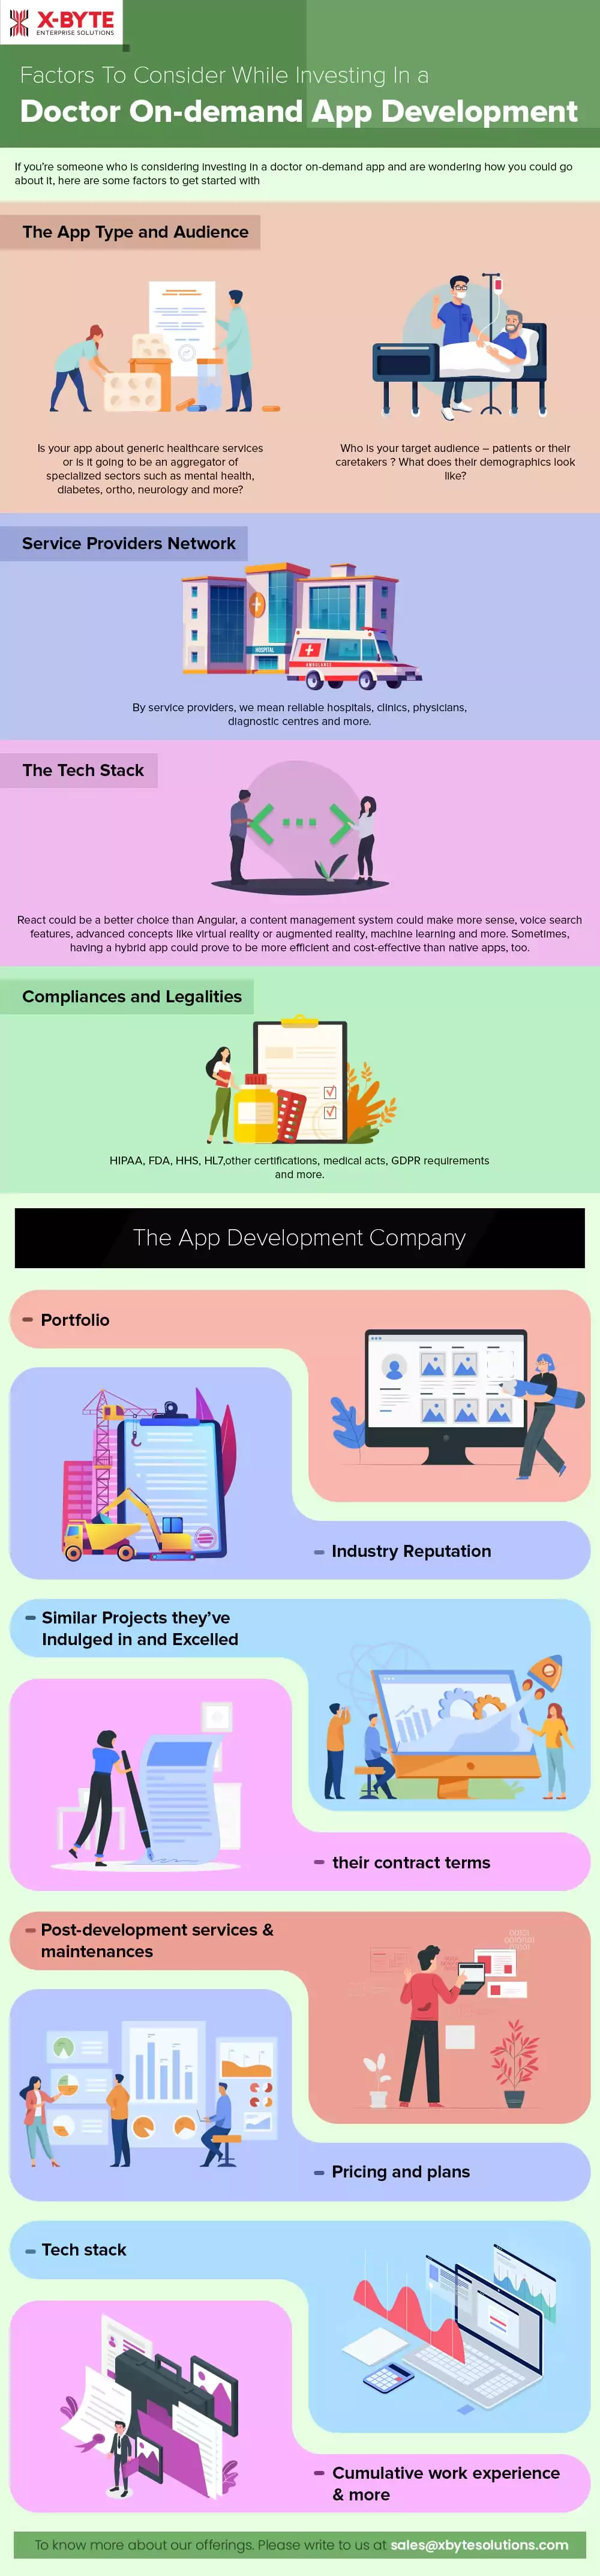 factors-to-consider-while-investing-in-a-doctor-on-demand-app-development-min.webp